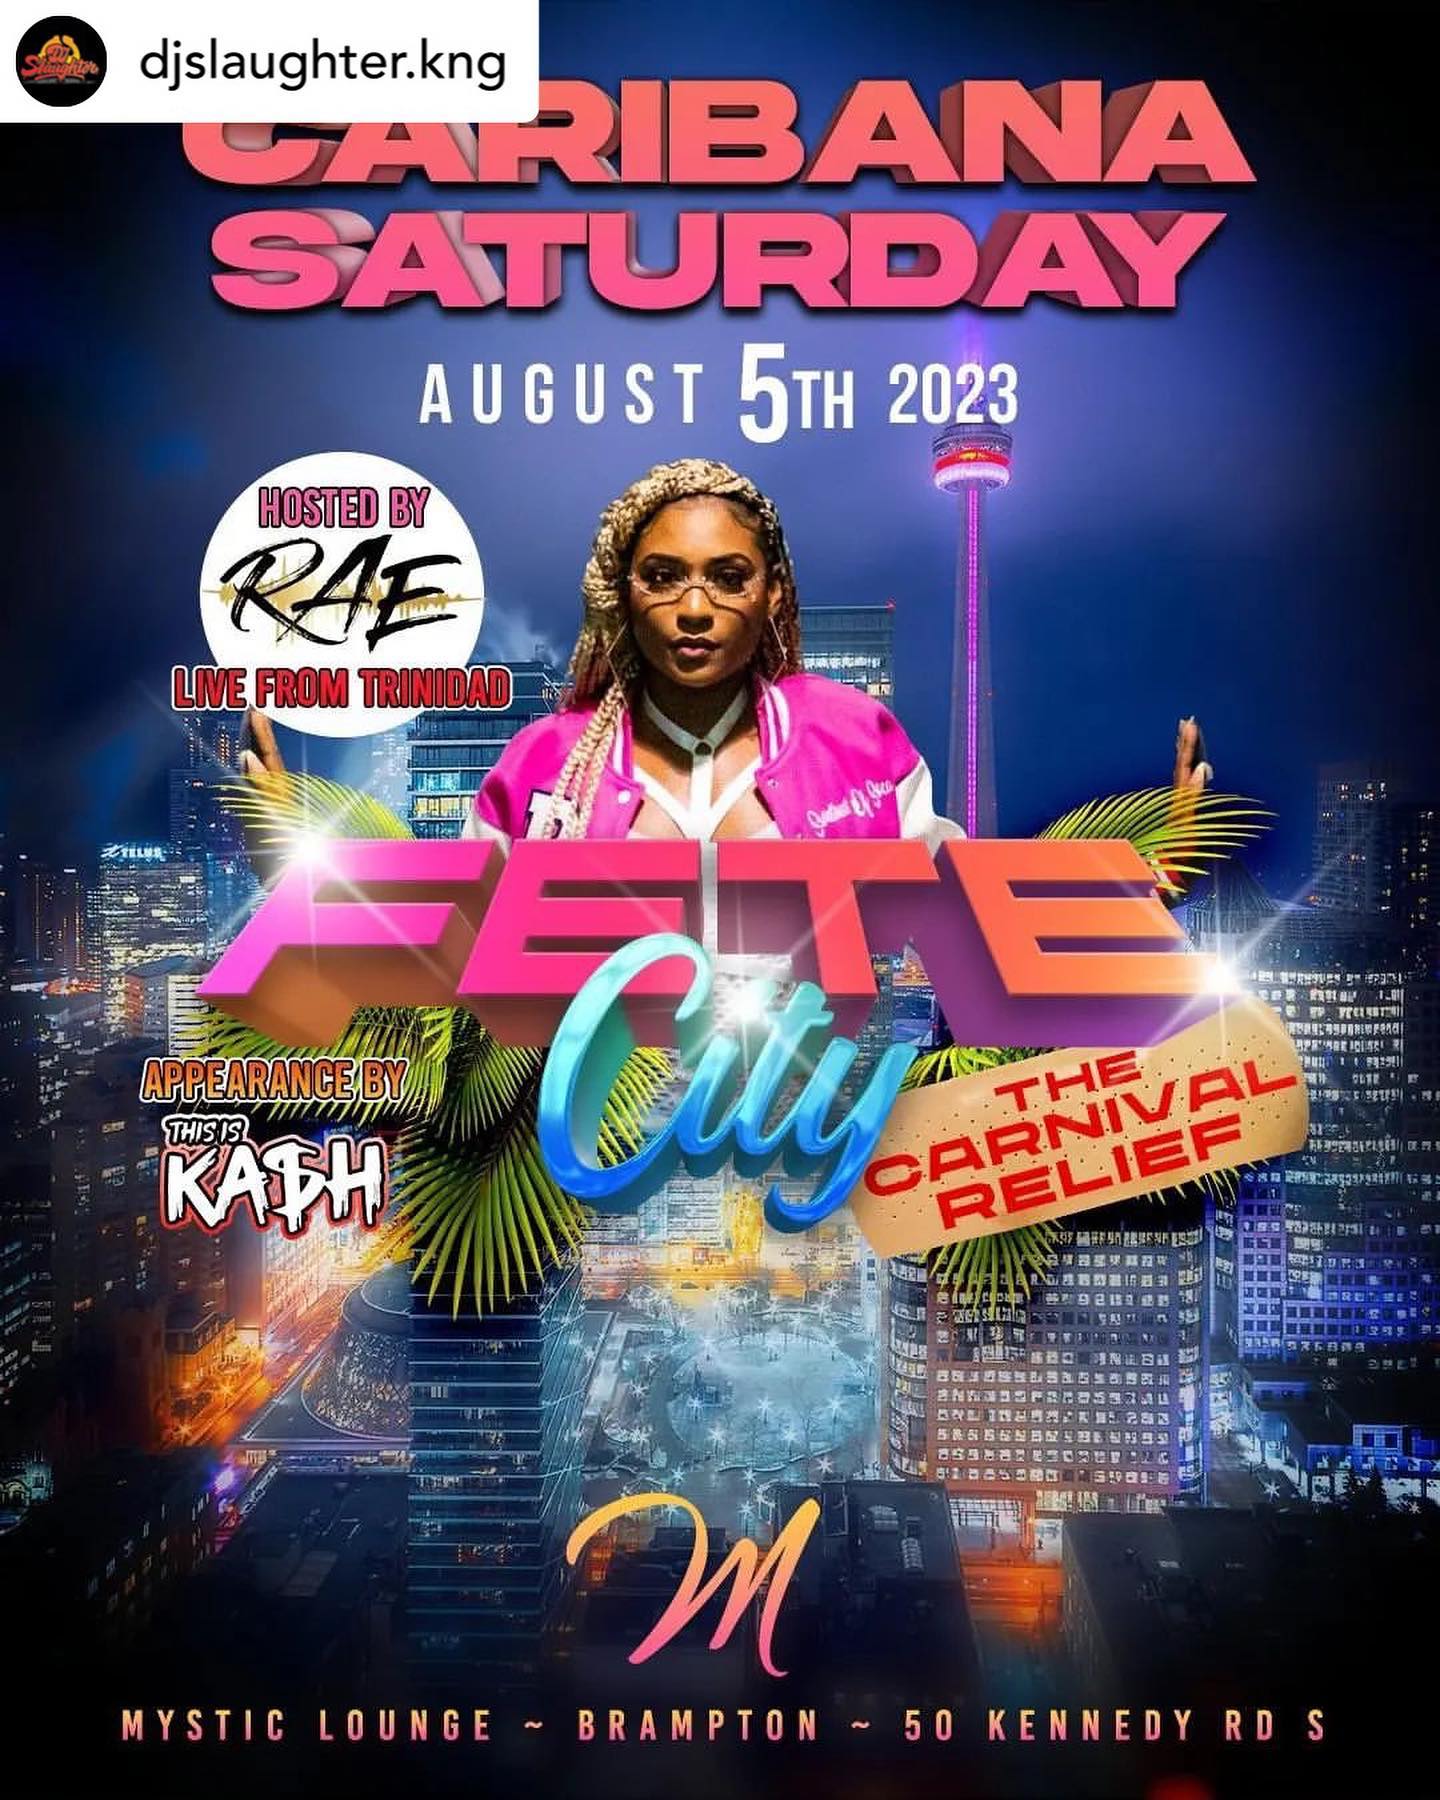 • @djslaughter.kng Caribana Sat
 Aug. 5

  Fete City 
The Carnival Relief
️ Free Free Free️
 Only 
Available via Download: 
  From 
  Ticketgateway.com
 ️Until Sold Out 

  Mystic Lounge
  @mystic.restobar
  11pm-4am

  Hosted By:
 Rae 
  From Trinidad 🇹🇹 

  Appearance By:
 KA$H 
  kash_music416

 Surprise V.I.P Guests 
  Passing Through!!
 International Djs & Artists 

Music By:
Bass @imdjbass
Selector Pro From POS 96.1WEFM @selectorpro
Dj Token From Connecticut US @djtoken860
Productions Sounds From MTL @productionjr
Illest Southside @mr_illest
Dj Stinga @djay.stinga
Dj Kresser @_djkresser
Jeremixx @dj_jeremixx
Slaughter @djslaughter.kng
I.R.D One @i.r.d.one
Selector Sp @selector_sp_toronto
Z6 @z6.kng
KSR (Team Fugitive) @ksr_media
Kflex @dj_kflex
C-Lex @clexunrated

Hosted by:
Tek Reloaded @tek_reloaded_2.0
OD Promotions From MTL @odpromotions
R3dz @r_3_d_z
Subzero (Team Fugitive) @subzero_27

The Carnival Relief 
Free Ticket Only via Download: 

https://www.ticketgateway.com/event/view/fete-city

️$10 Tier 1
️$20 Tier 2 
General Admission ️$30 at the door️

Sponsors 
Southside Ent @southside_3nt 
SouthSide SN @shaun_gotti13
SouthSide Josh @jcm.1987 
Gq @gq_gentlemans_quarters
Eco Air Contracting Inc @ecoaircontractinginc
Mc Nadzzz @mcnadzzz 
OvrProof ovrproofsociety 
King Pin Ent @_rayvaz
Dope @dopemanayube 
SelfMade @selfmadekingniggah_ 
EmpressPromo @empresspromo
Leya Promo @leyasxo
4 Seasonz Auto Spa @4seasonz_autospa 
M&E Promo @mandepromotions 
Psychinthe6ix @Psychinthe6ix_
Dps Promo @dps.promo 
Any & CO. Apparel @any.co.apparel 
KNG @kng.entertainment 
Bonez Promo bonez_promos 
Beauty Creations By D @beautycreationsbydy
@find_a_dj